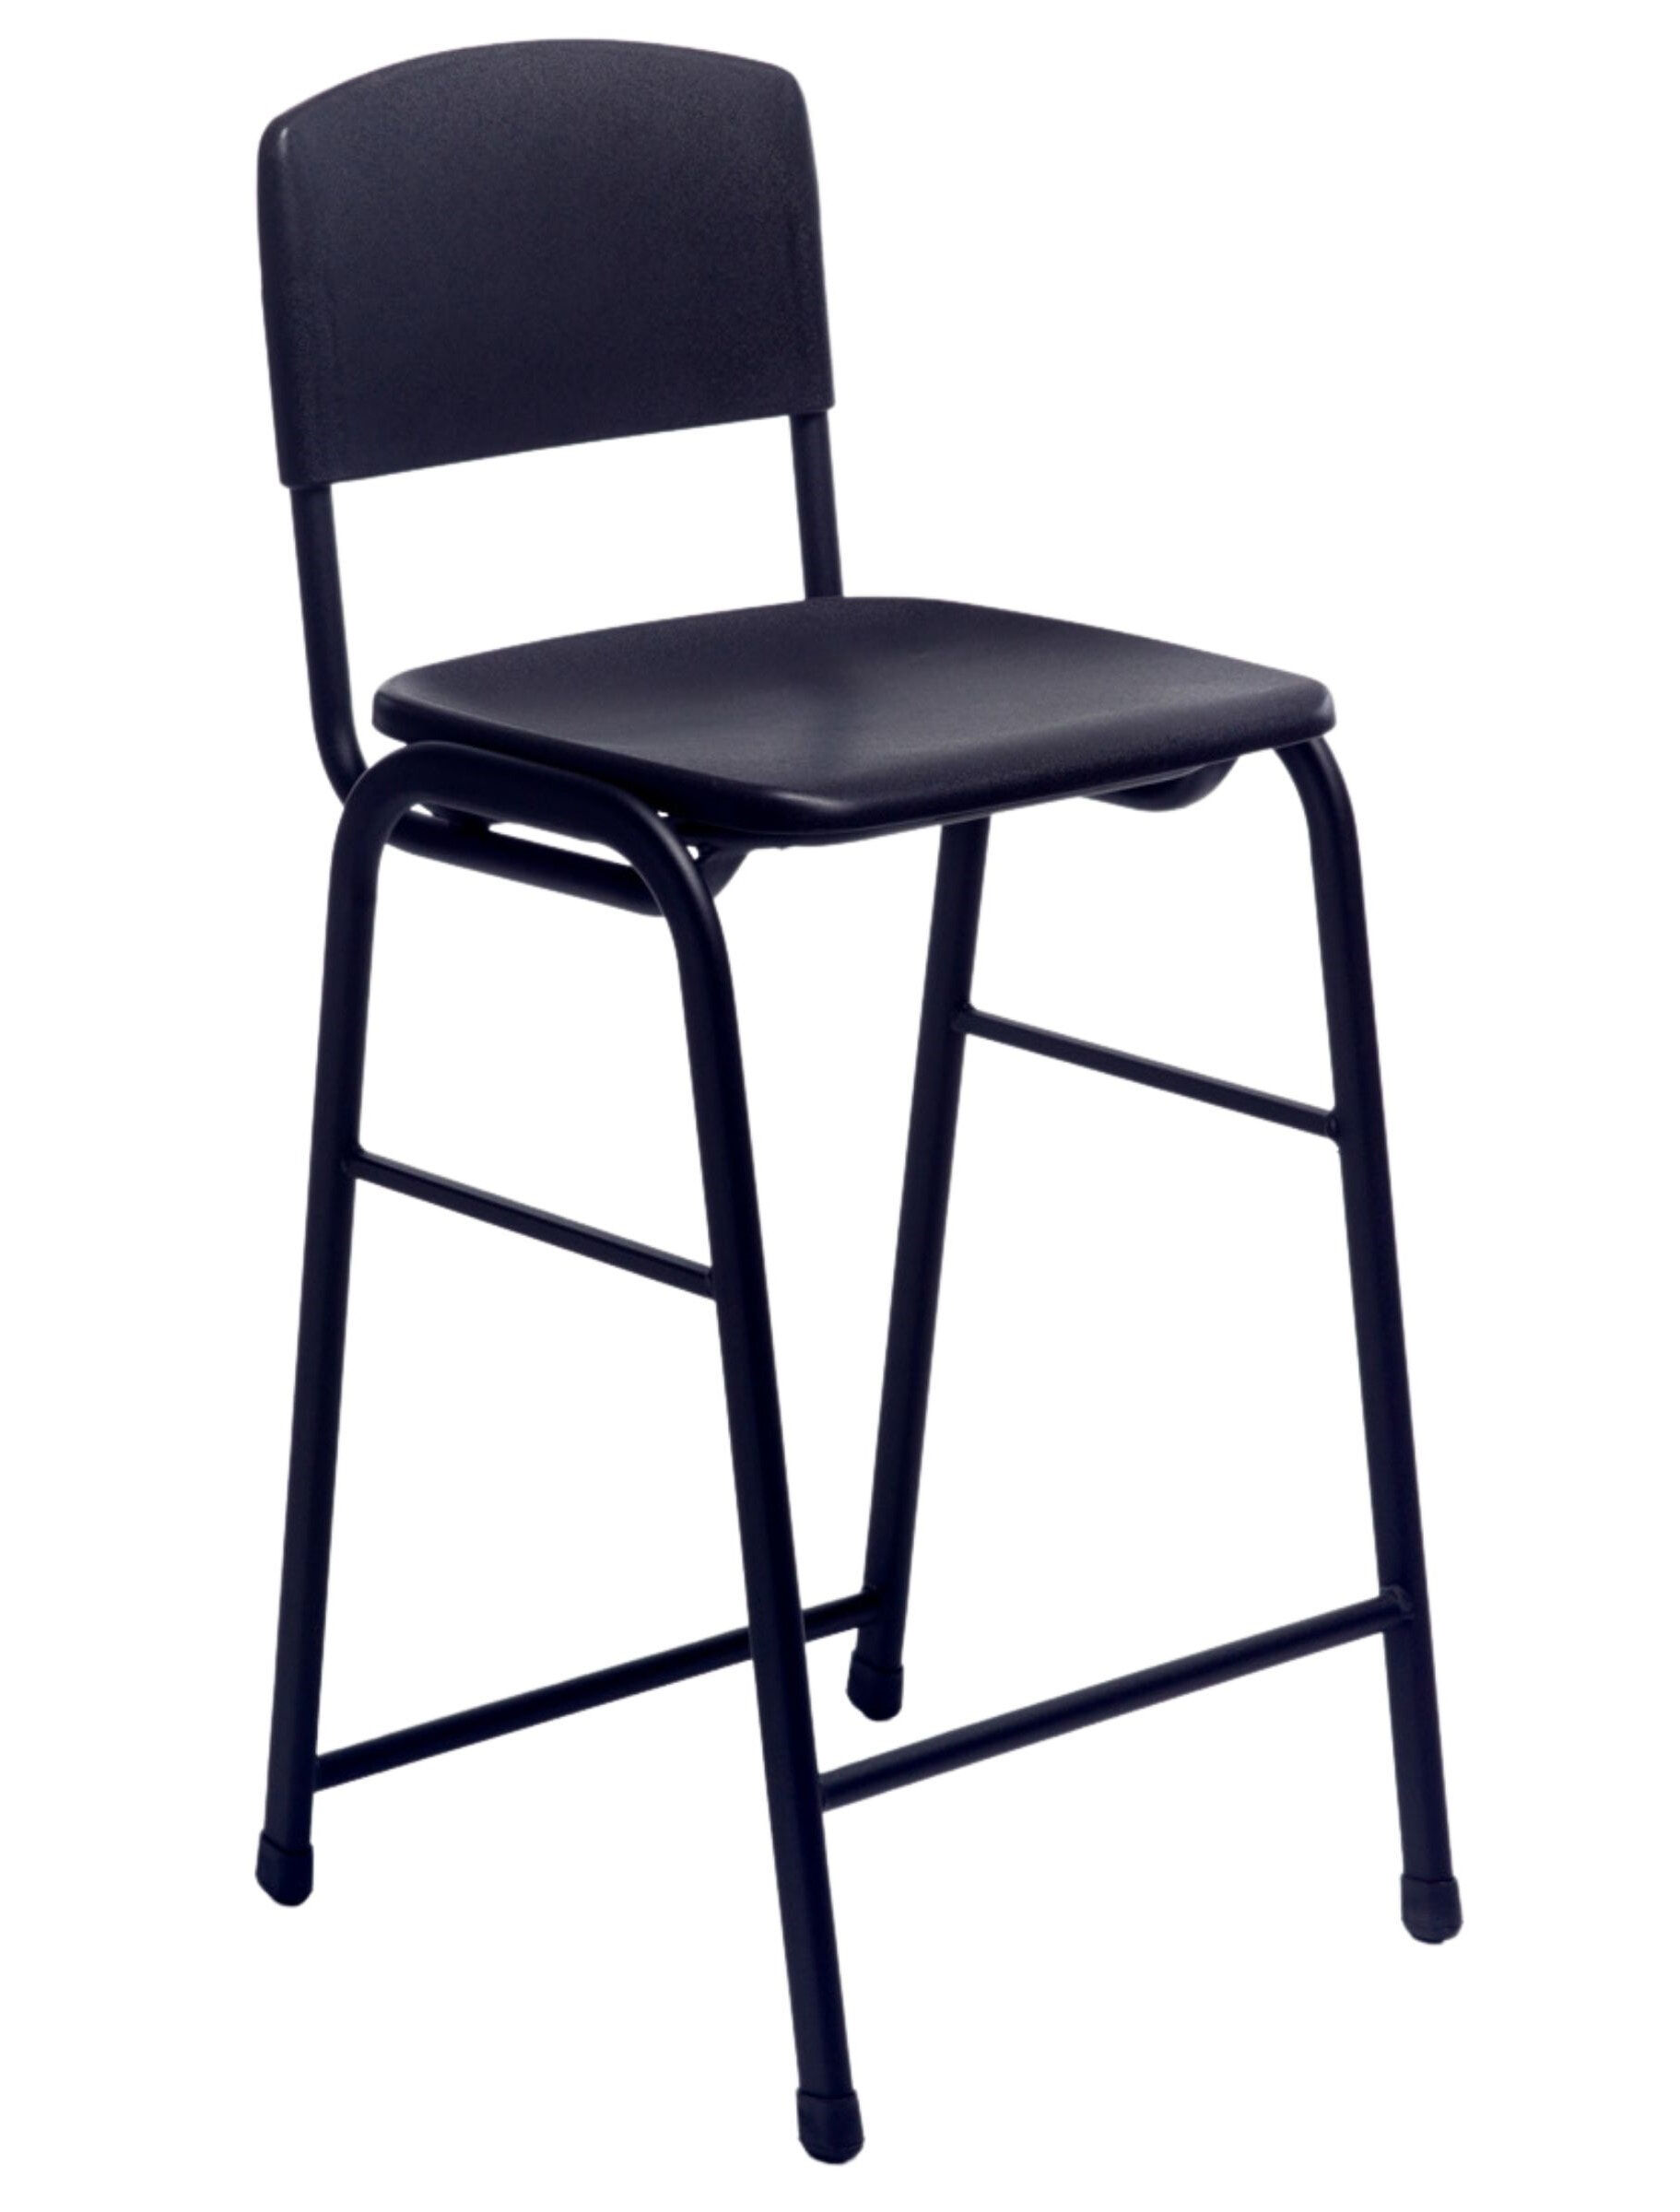 Research stool with back resta